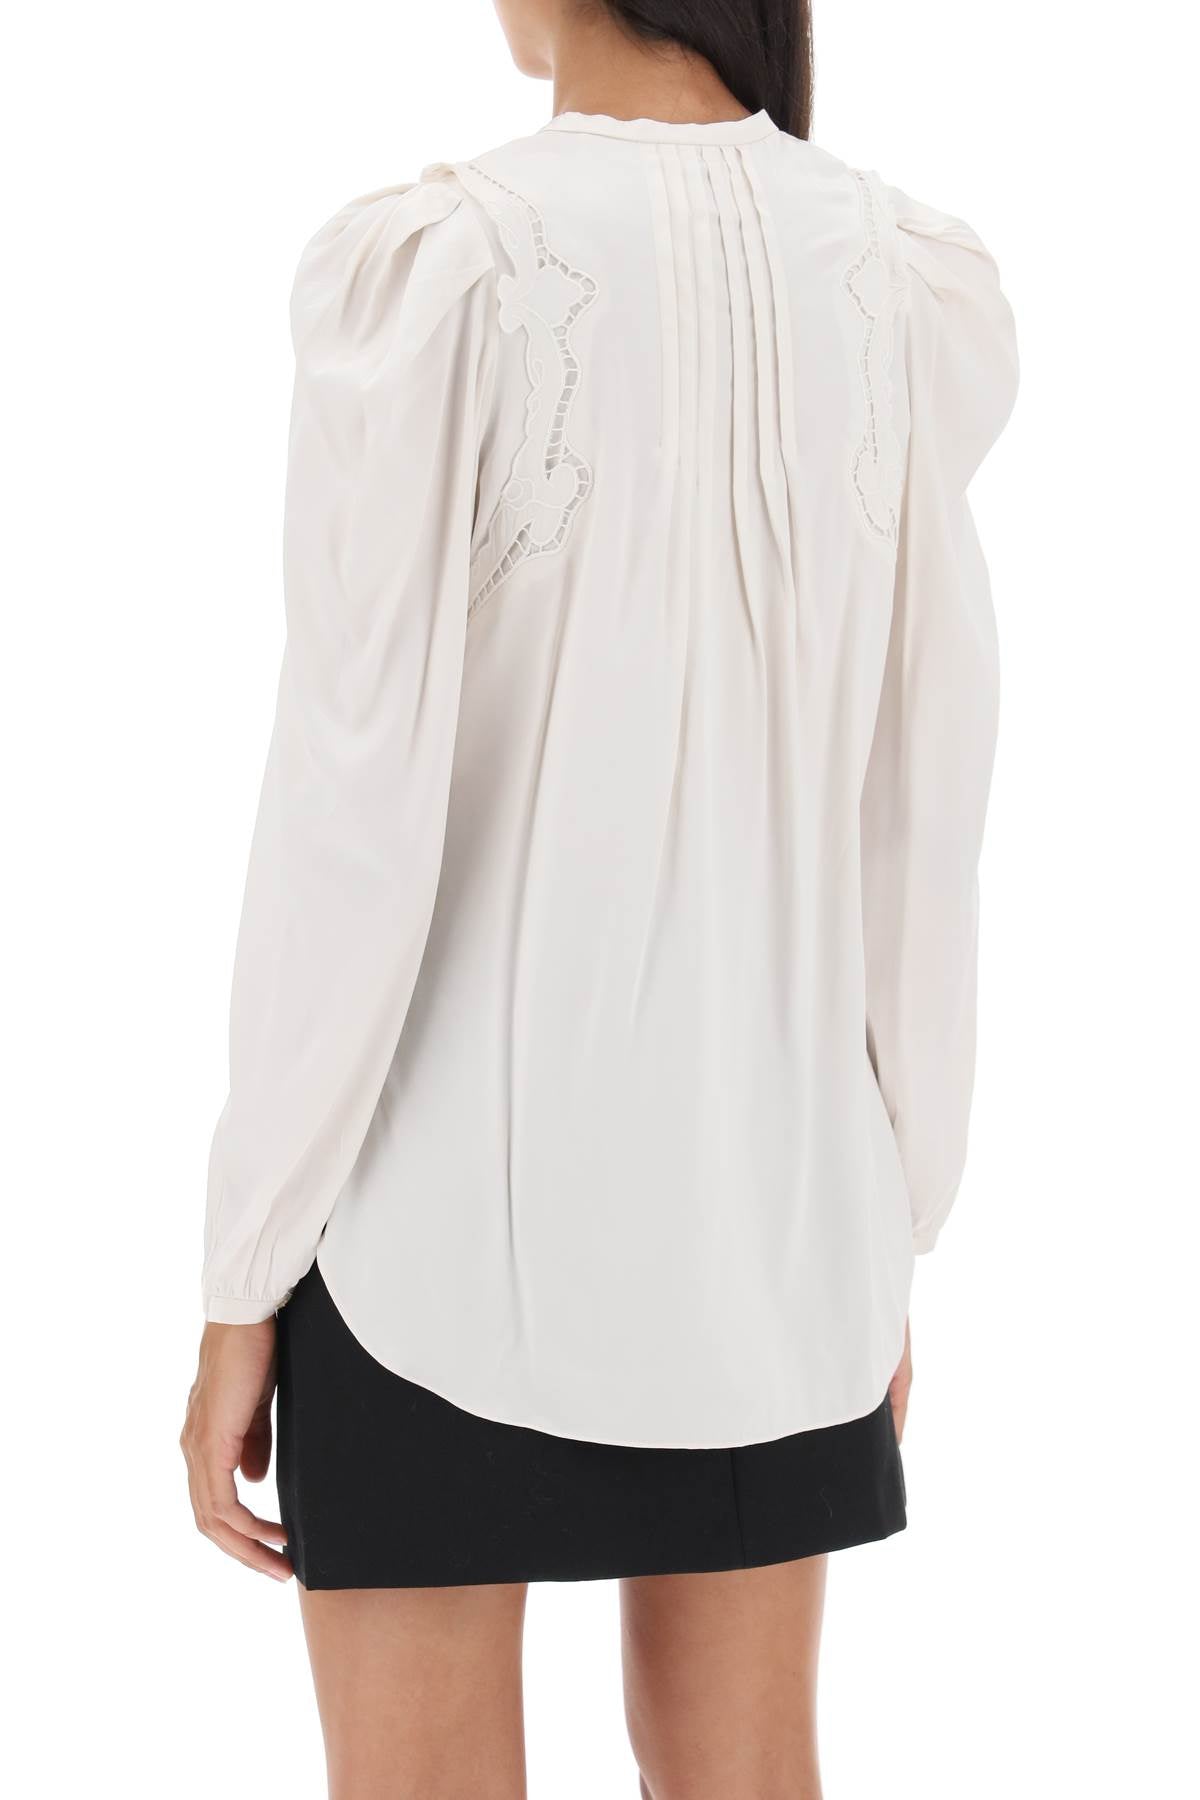 Isabel marant 'joanea' satin blouse with cutwork embroideries-2